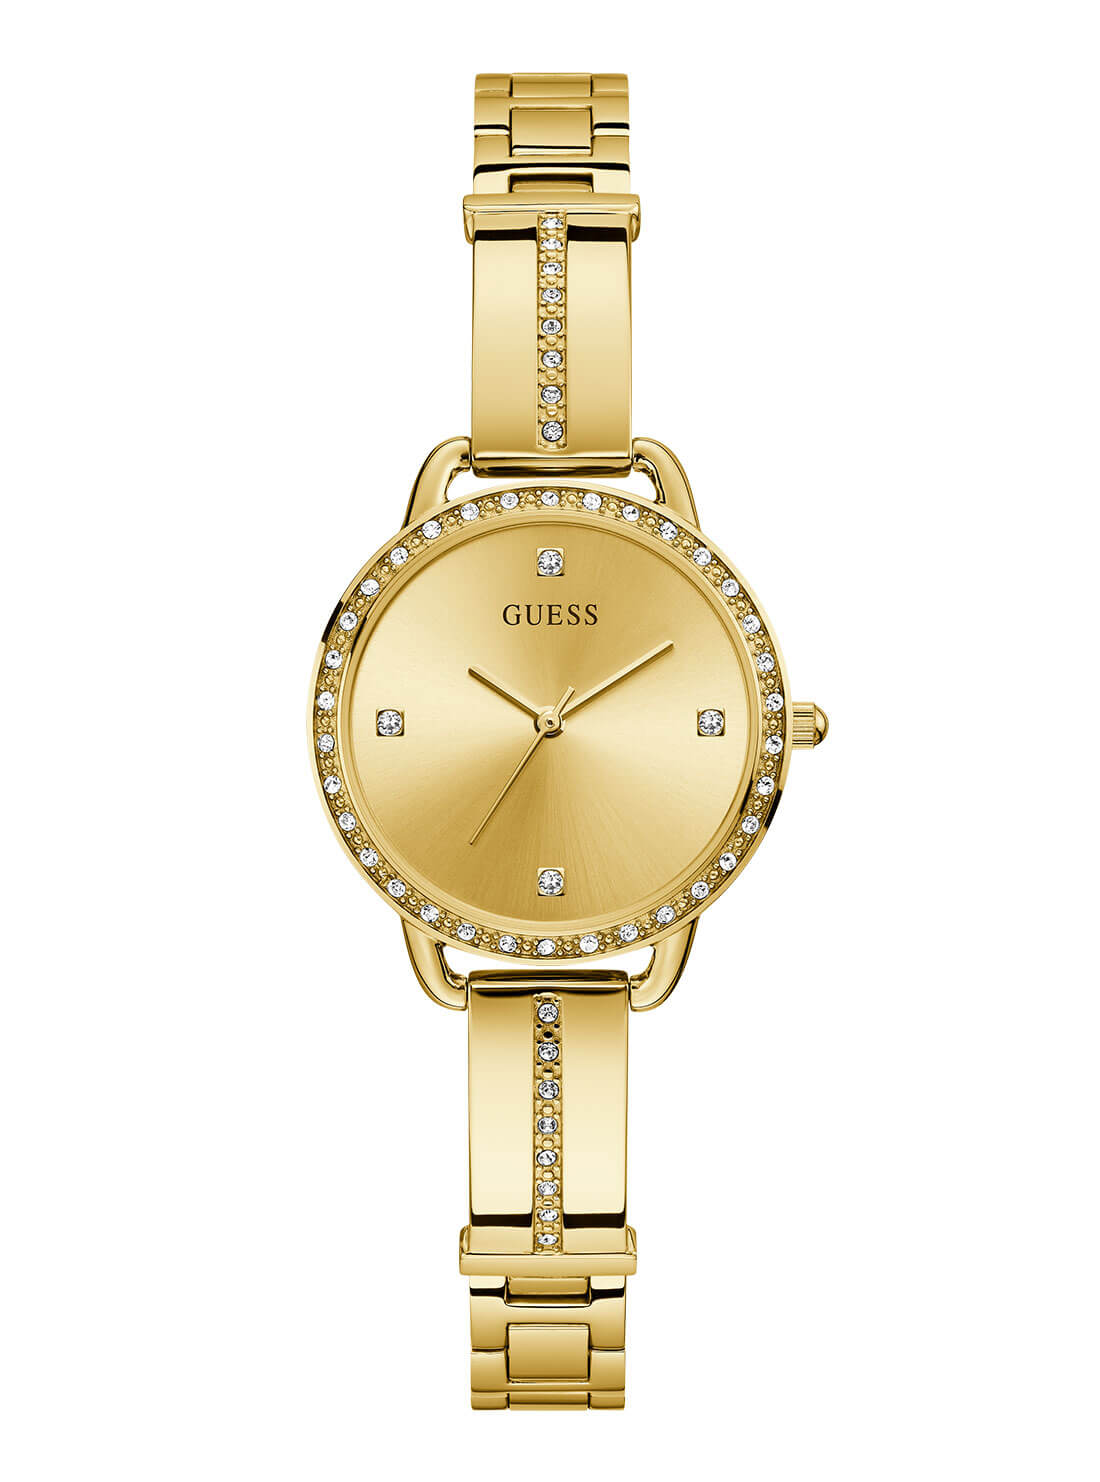 GUESS Women's Gold Bellini Crystal Watch GW0022L2 Front View